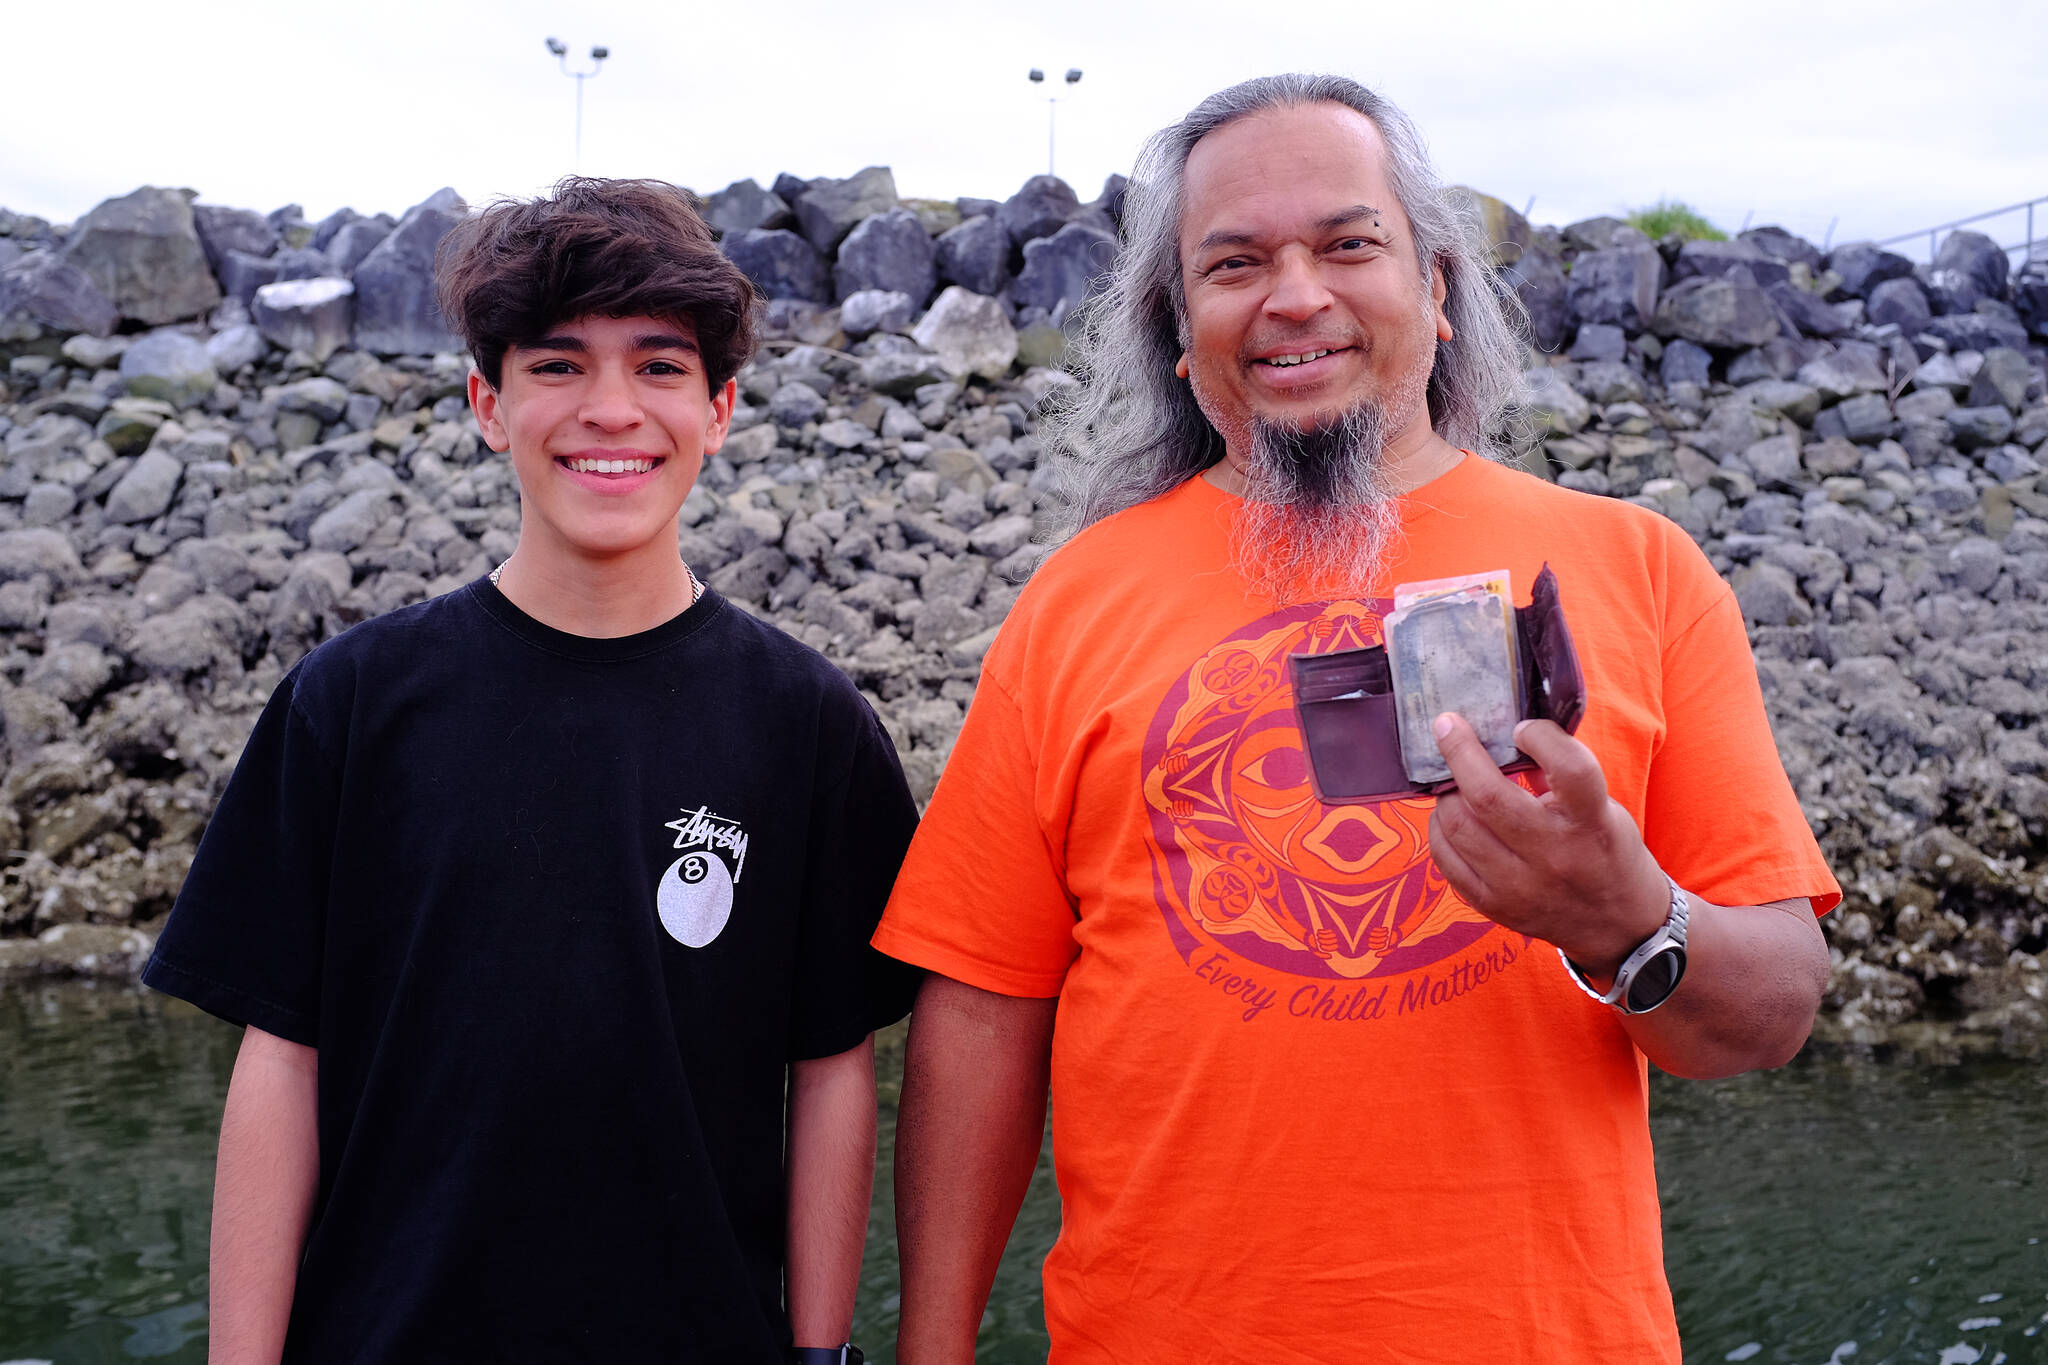 Nick Chowdhury (right) was in his early twenties when he lost his wallet while fishing in 1991. More than 30 years later, on May 10, 2024, Jamie Lee, aged 14, would return his wallet, finding it at roughly the same location where Chowdhury last saw it. (Olivier Laurin / Comox Valley Record)